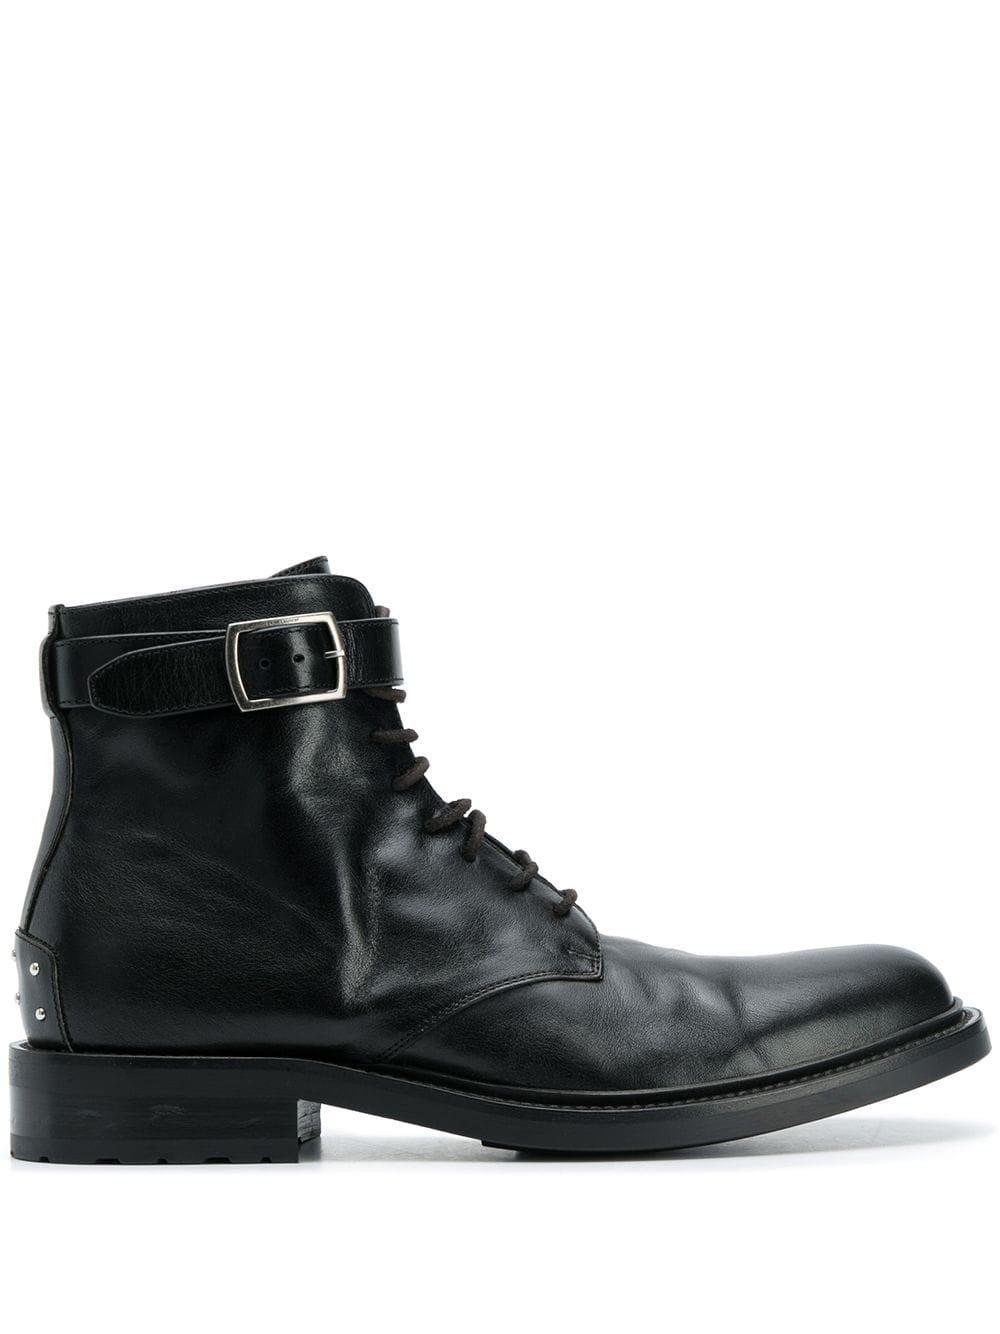 Saint Laurent Leather Army Stud Detailed Boots in Black for Men - Save ...